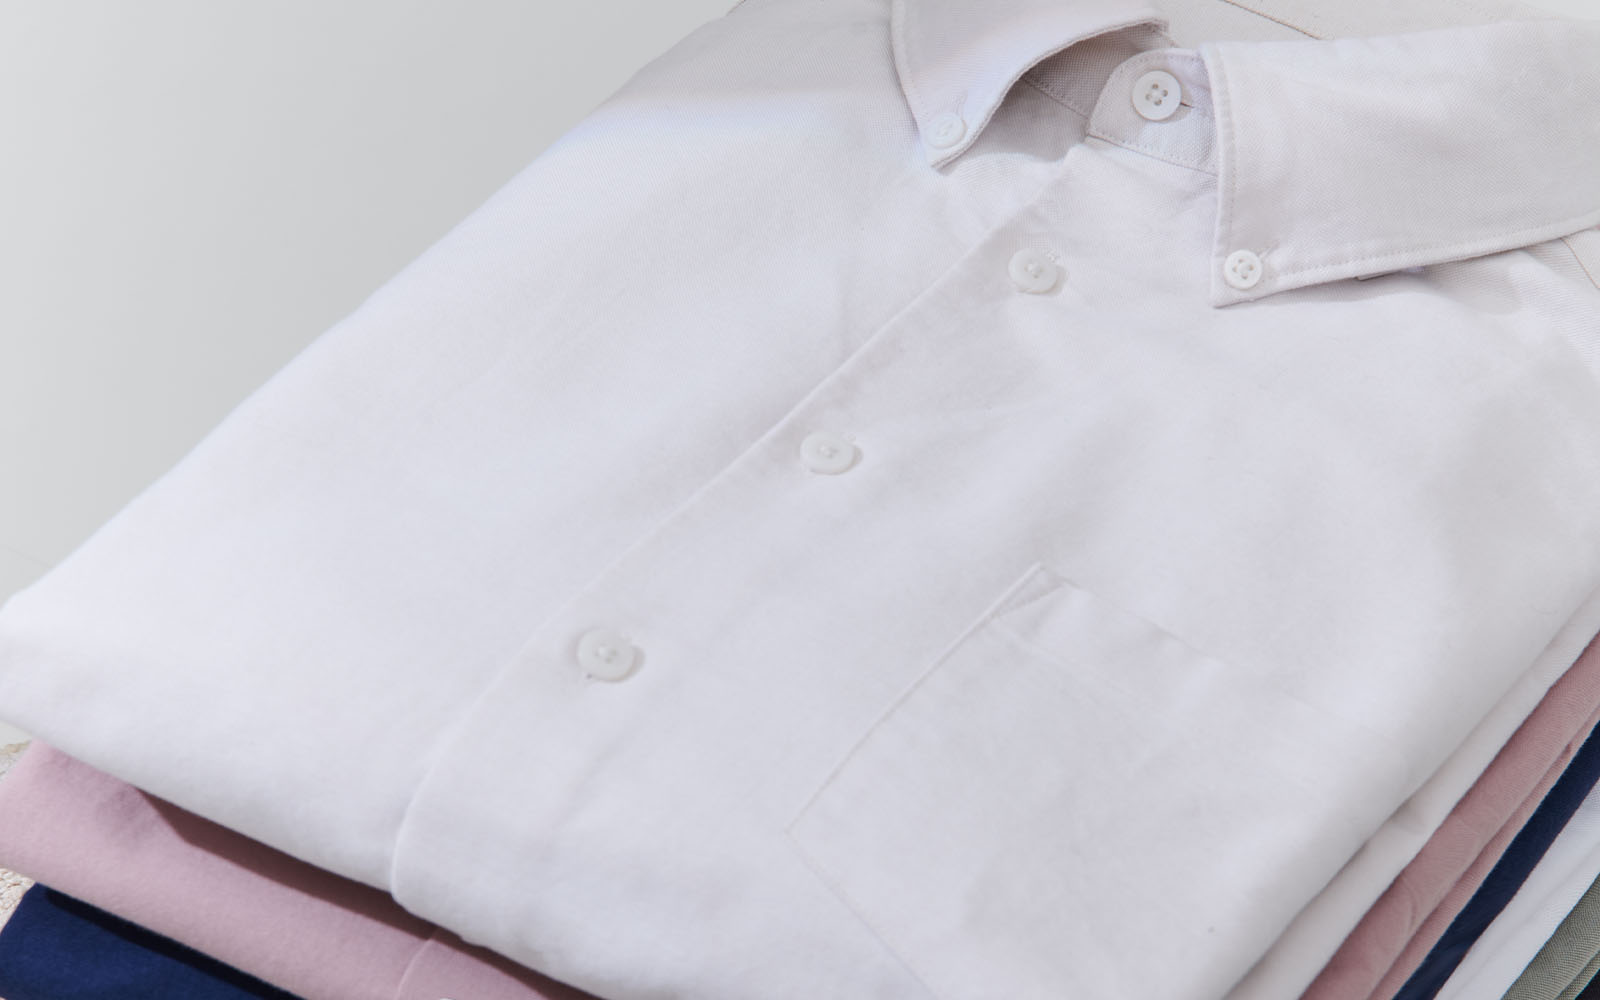 Shirt style guide: The Oxford Shirt